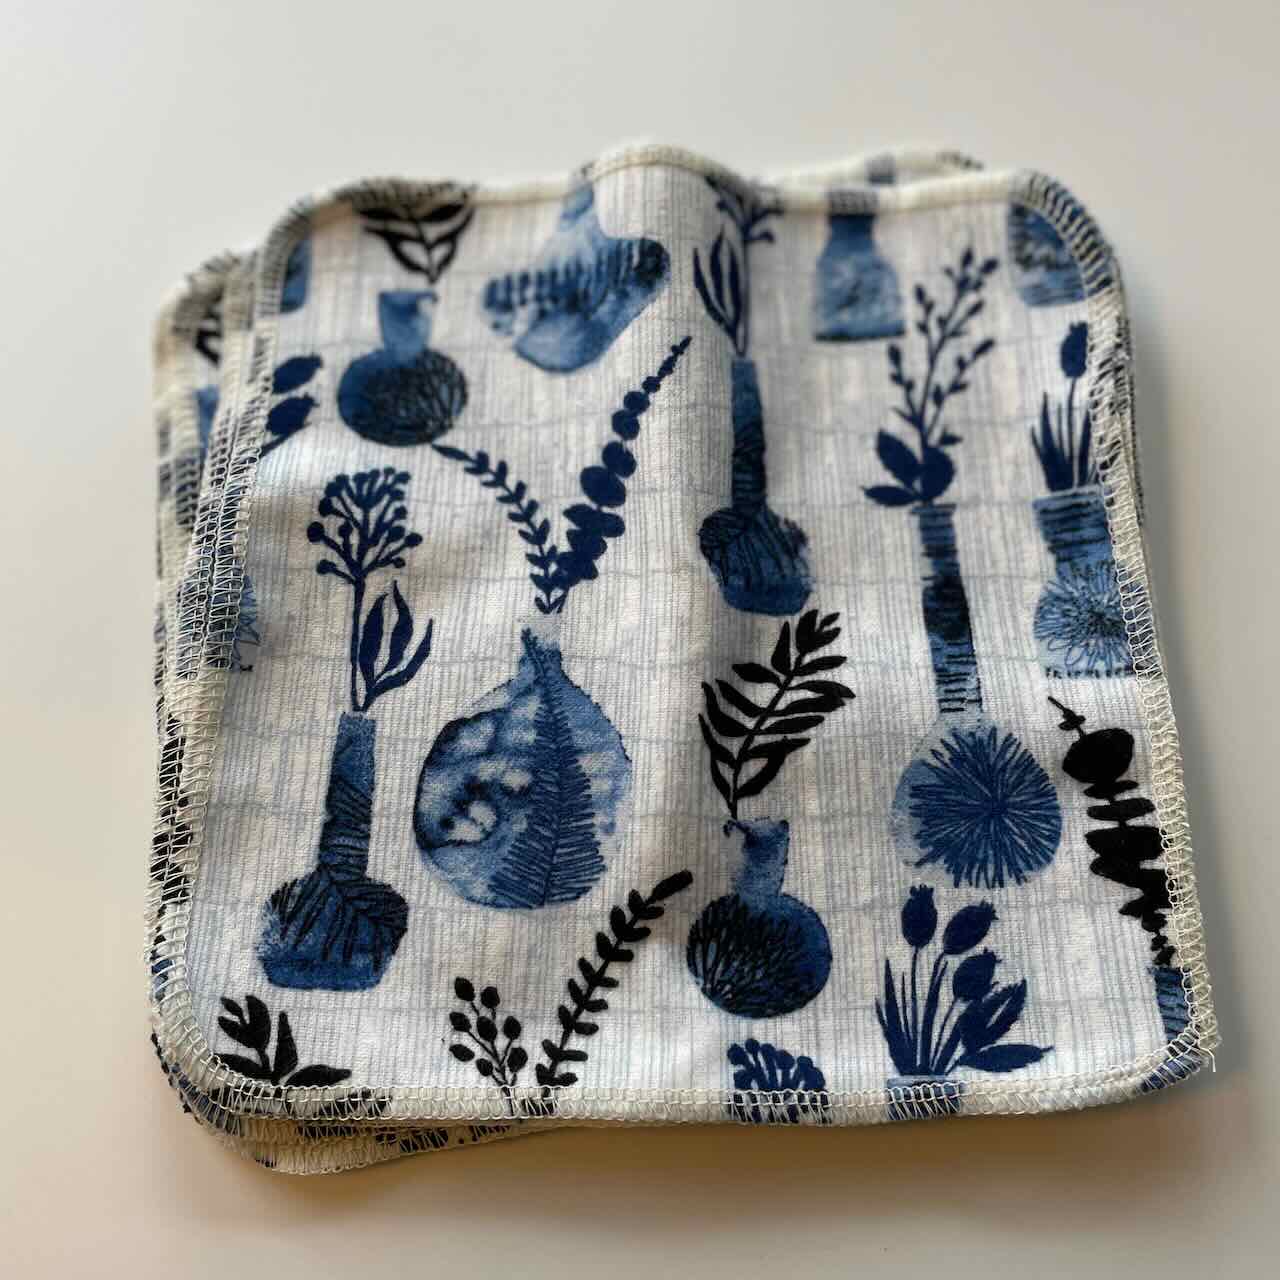 flat lay of a set of 10 reusable cloth wipes, with cool blue leaves and vases printed on the fabric, close up view